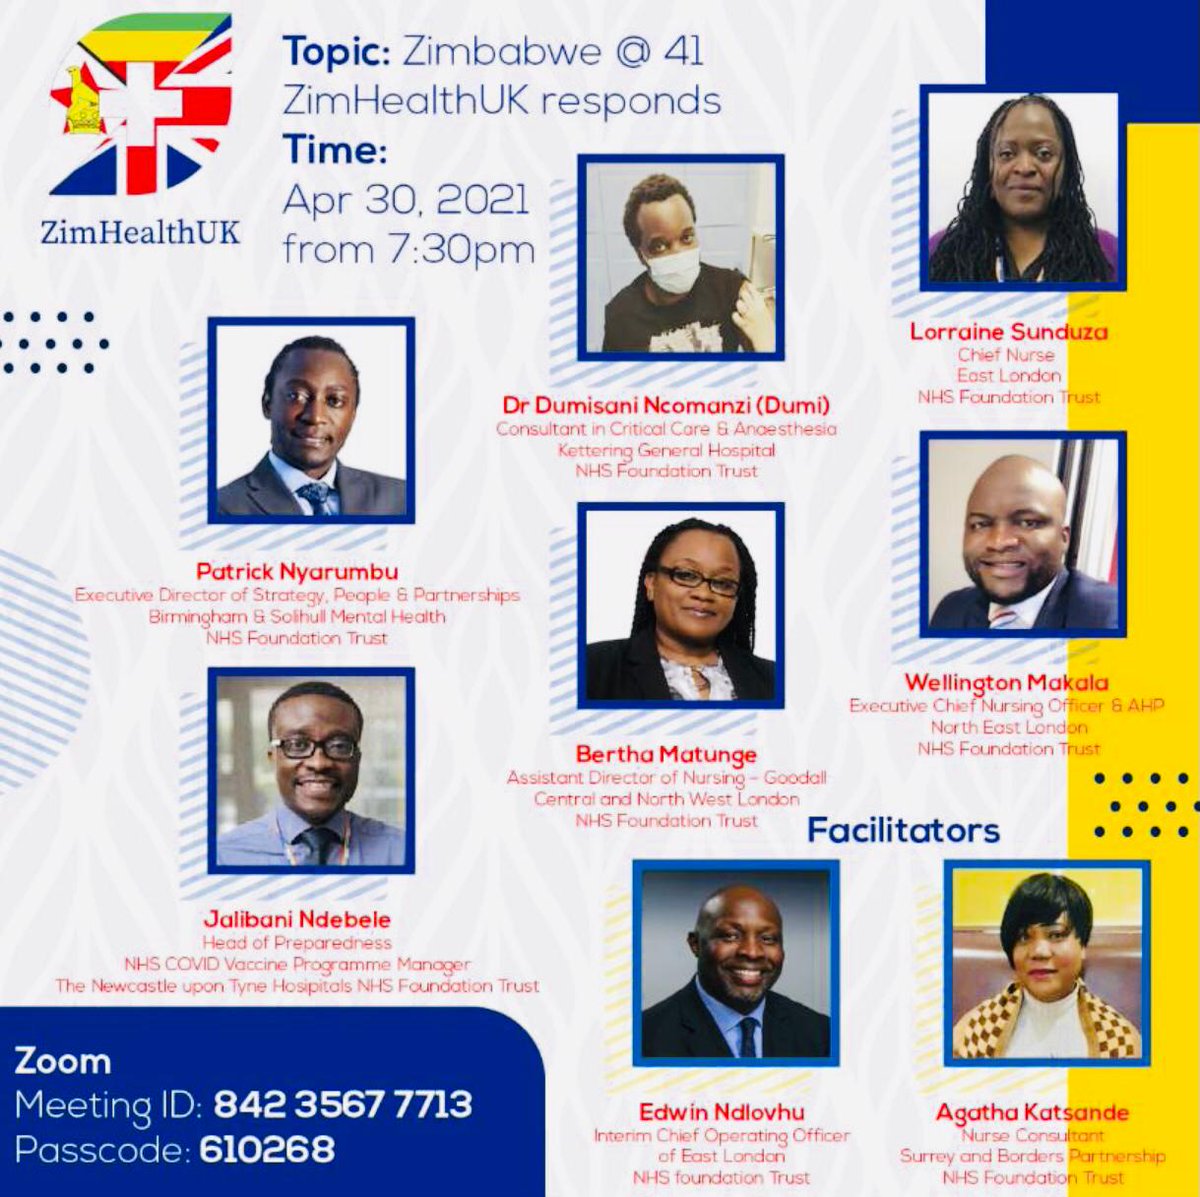 📢📣Super excited to announce this 'AWESOME' event📣📢

@ZimHealthUK is hosting a celebration & reflection of #Zim@41 🇿🇼 from a #diasporalens 

Don’t miss out with a panel of truly inspirational clinicians👌🏾🇿🇼

@paddynhs @EdwinCCN 📢 @LorraineSunduza @wmakala #DrDumiNcomanzi